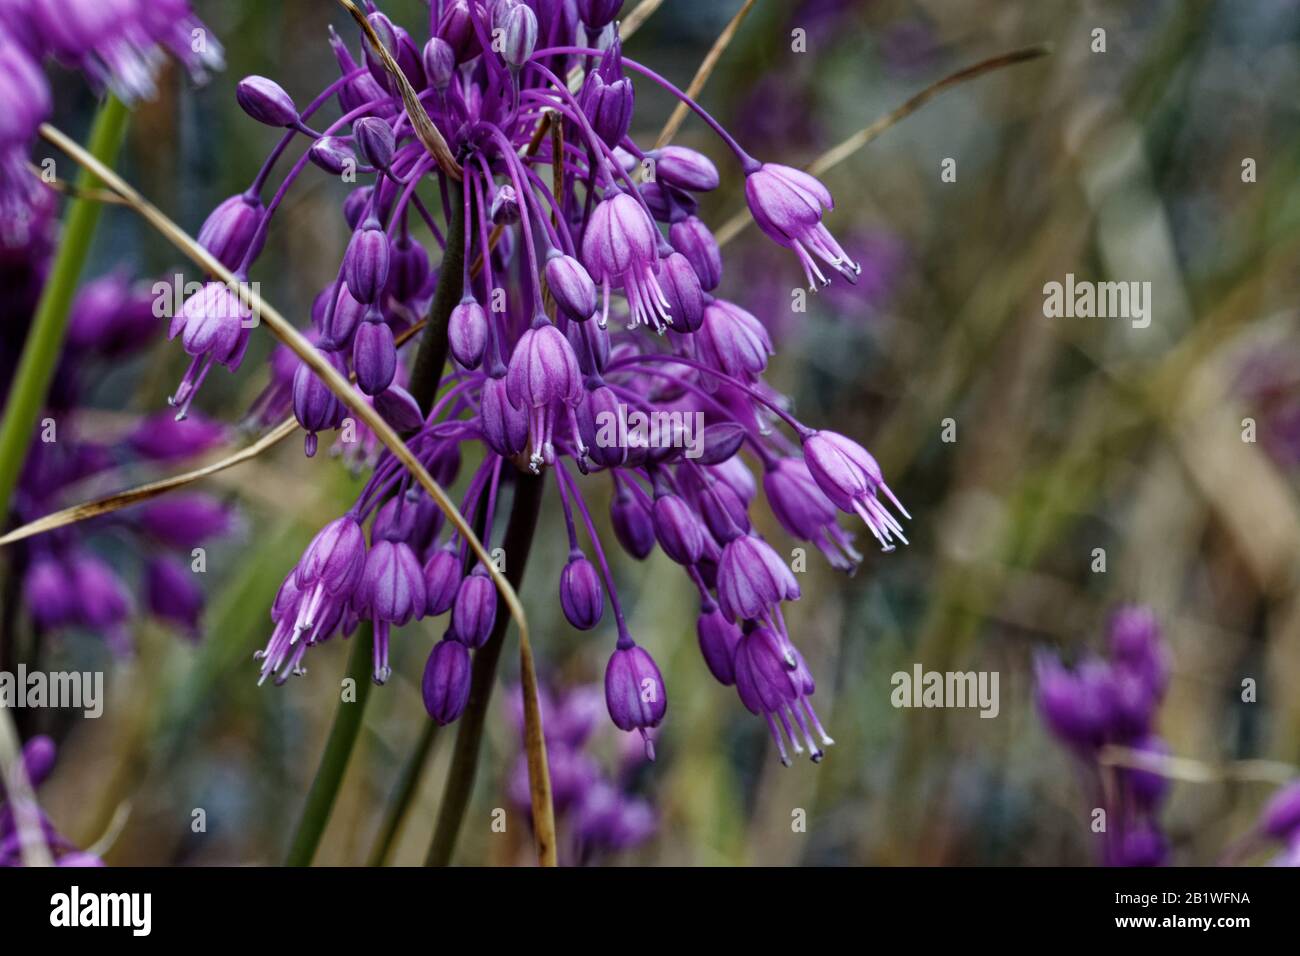 Allium carinatum, the keeled garlic or witch's garlic, is a perennial plant up to 60 cm tall. It is widespread across central and southern Europe. Stock Photo